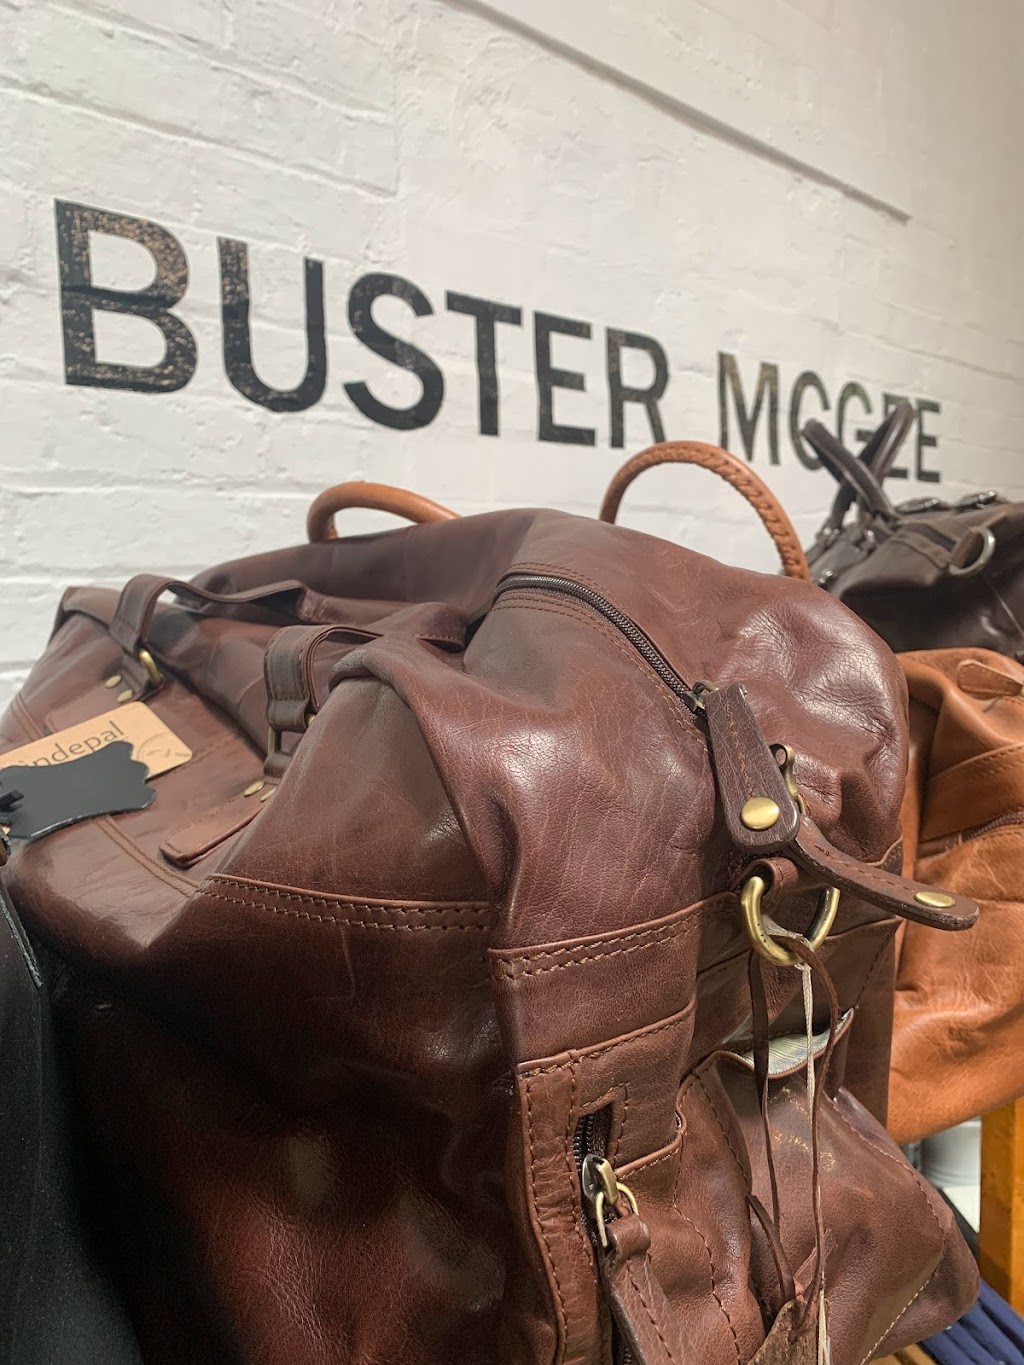 Buster McGee | clothing store | 10-12 Howe St, Daylesford VIC 3460, Australia | 0353773618 OR +61 3 5377 3618